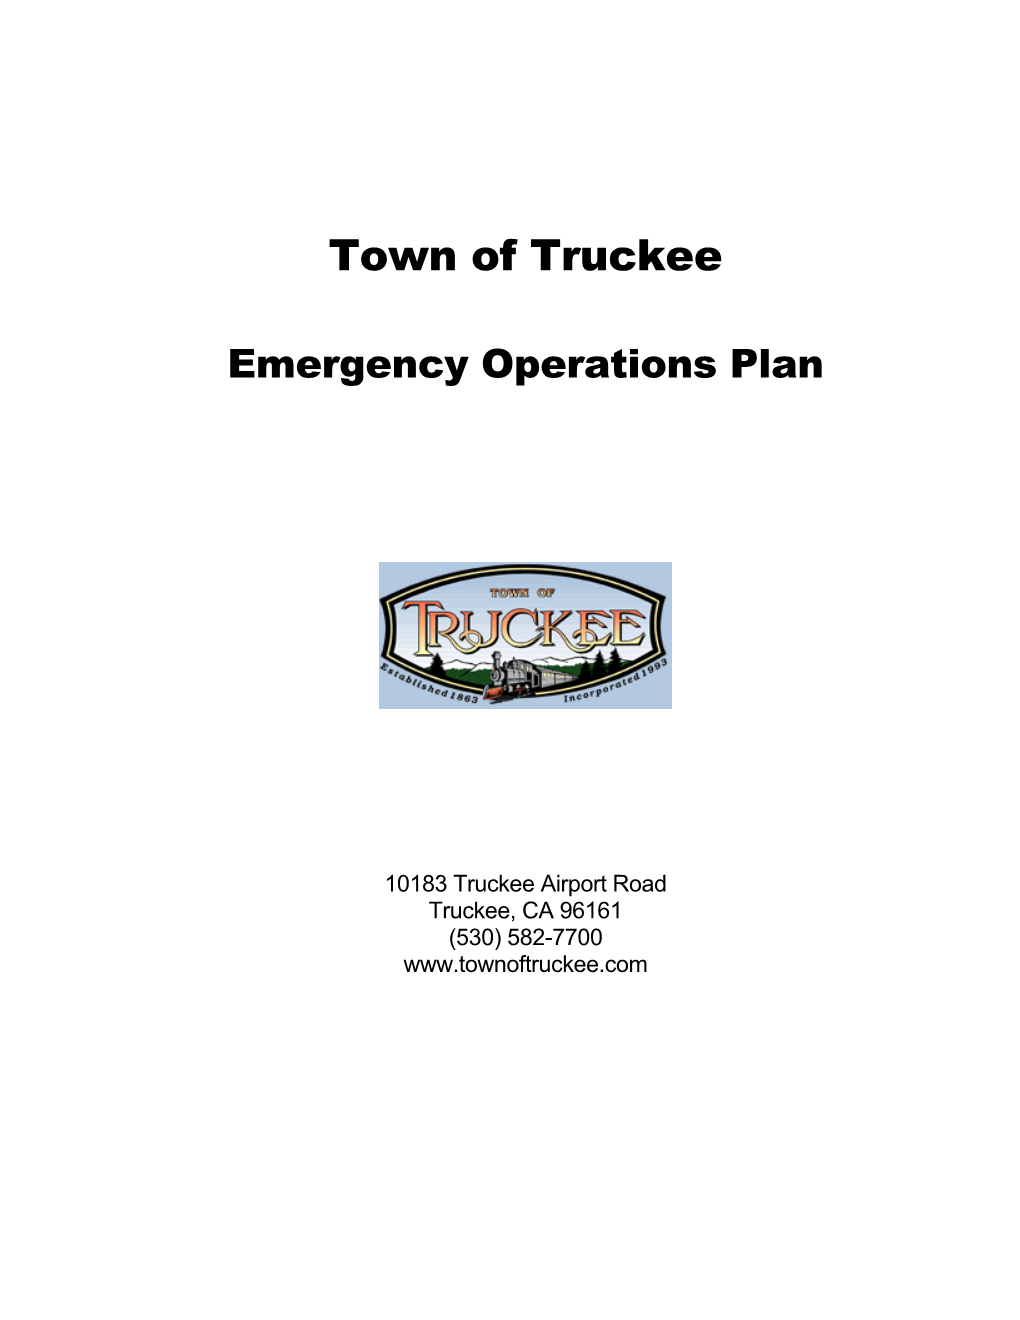 Town of Truckee's Emergency Operations Plan